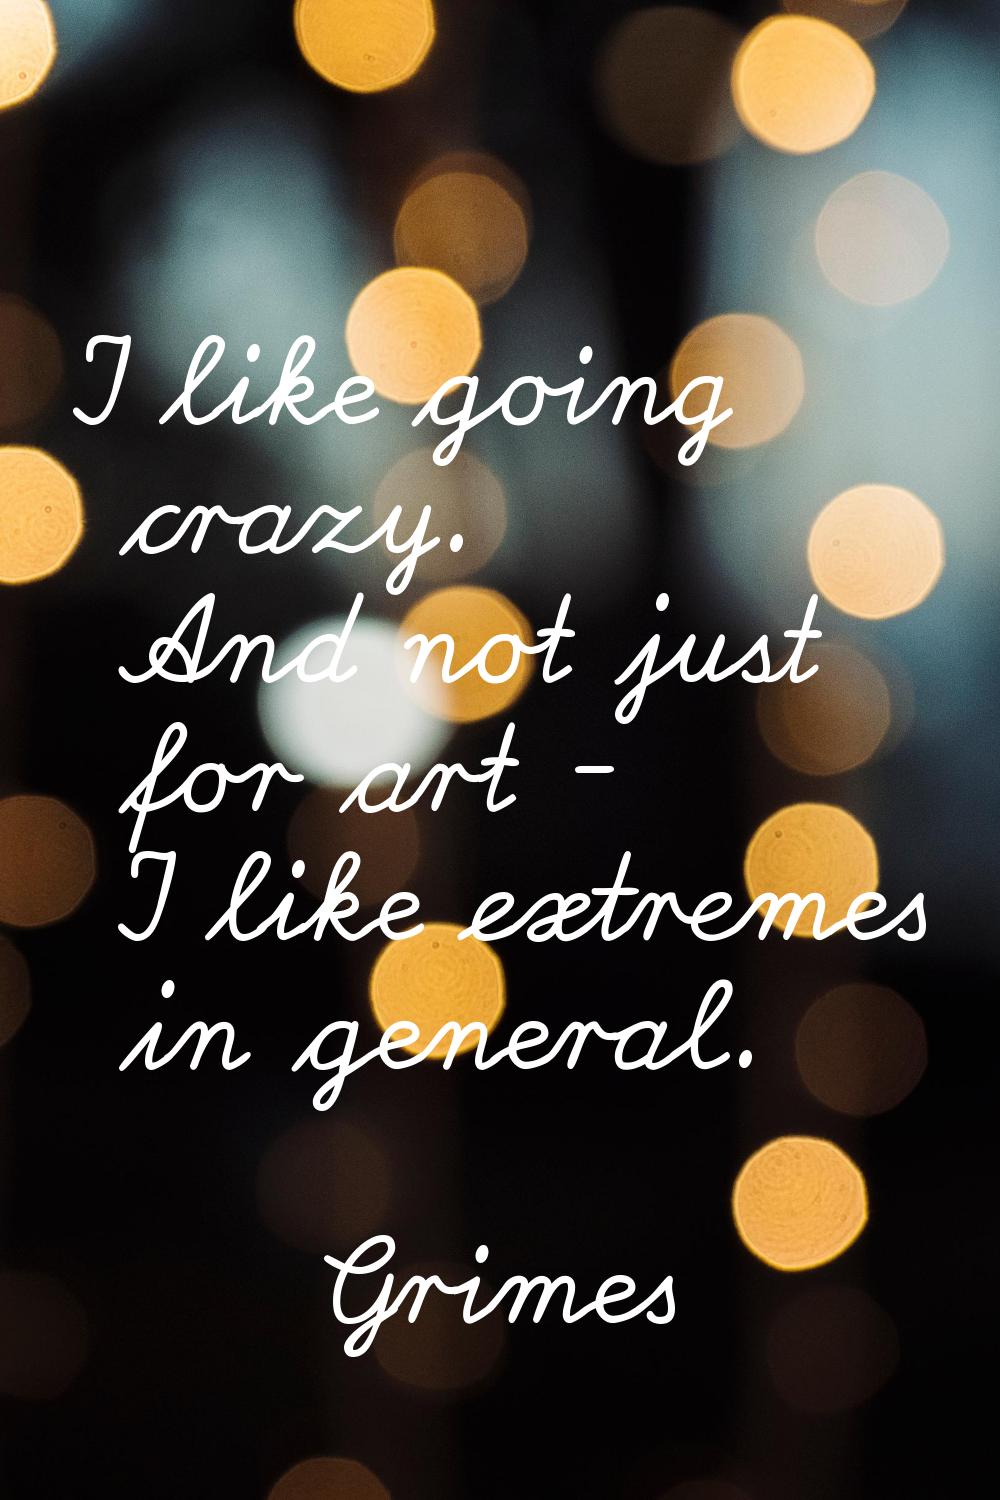 I like going crazy. And not just for art - I like extremes in general.